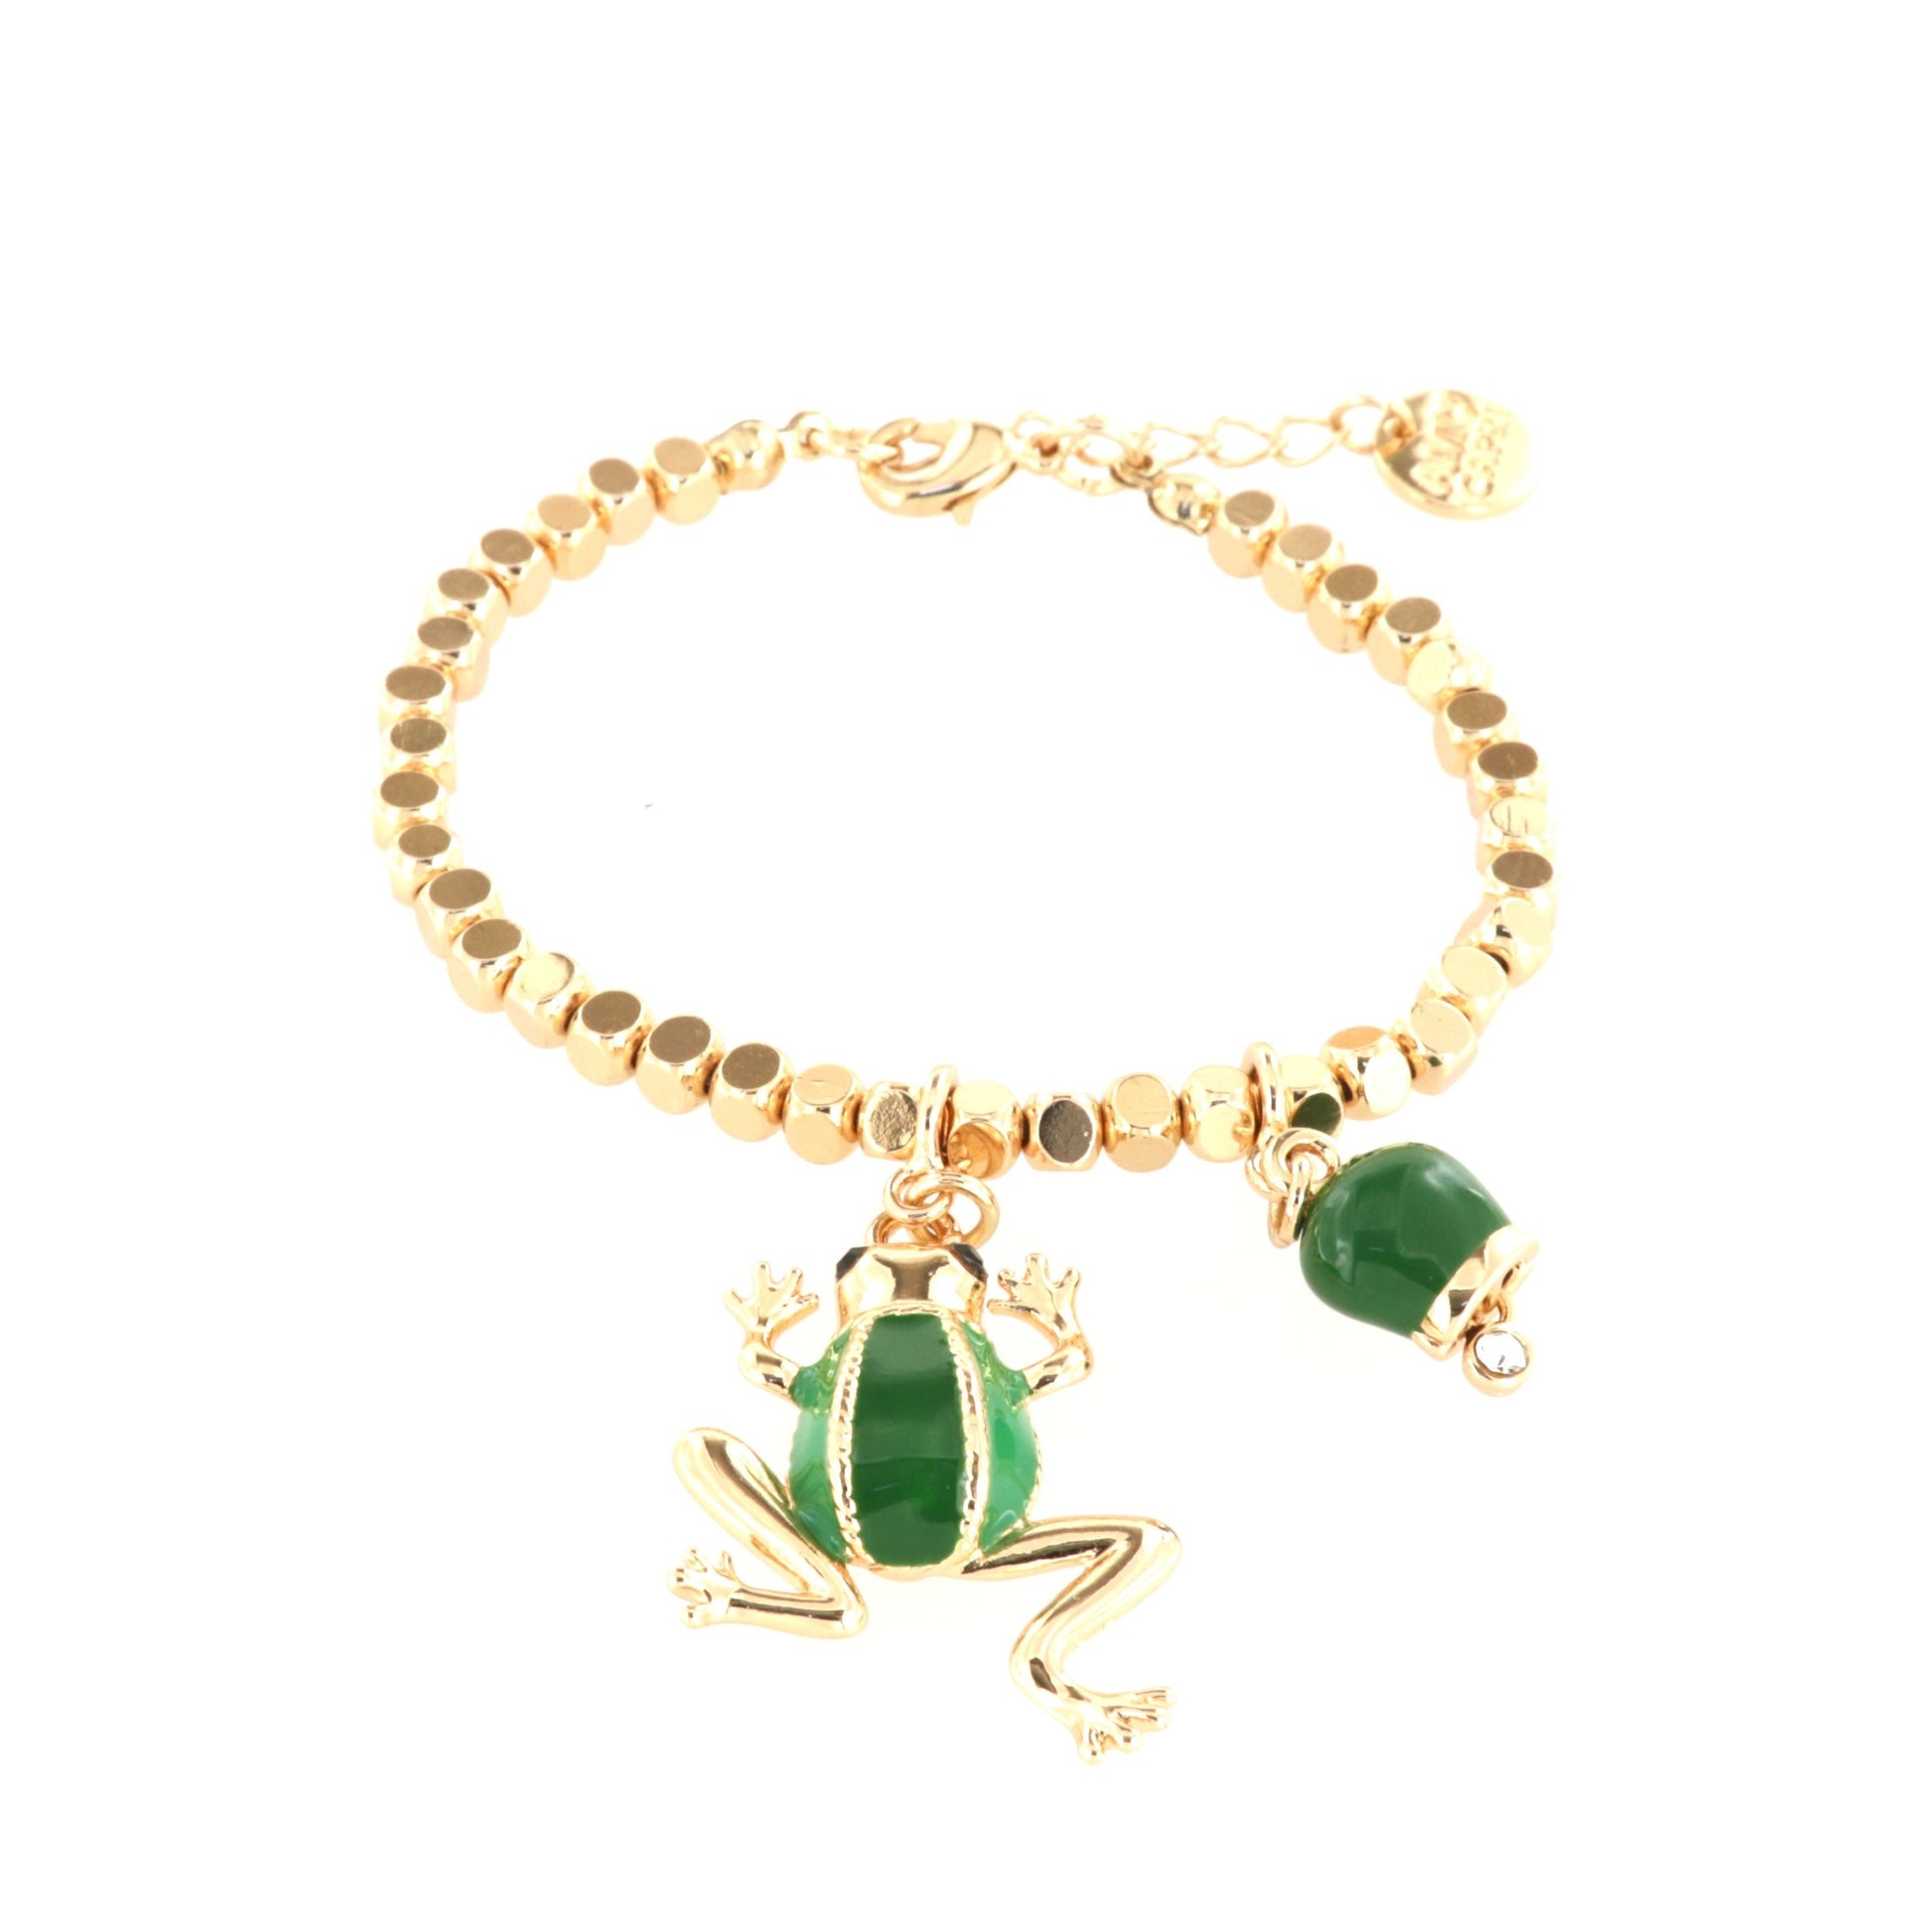 Metal bracelet with pendant frog and bell, embellished with green enamel